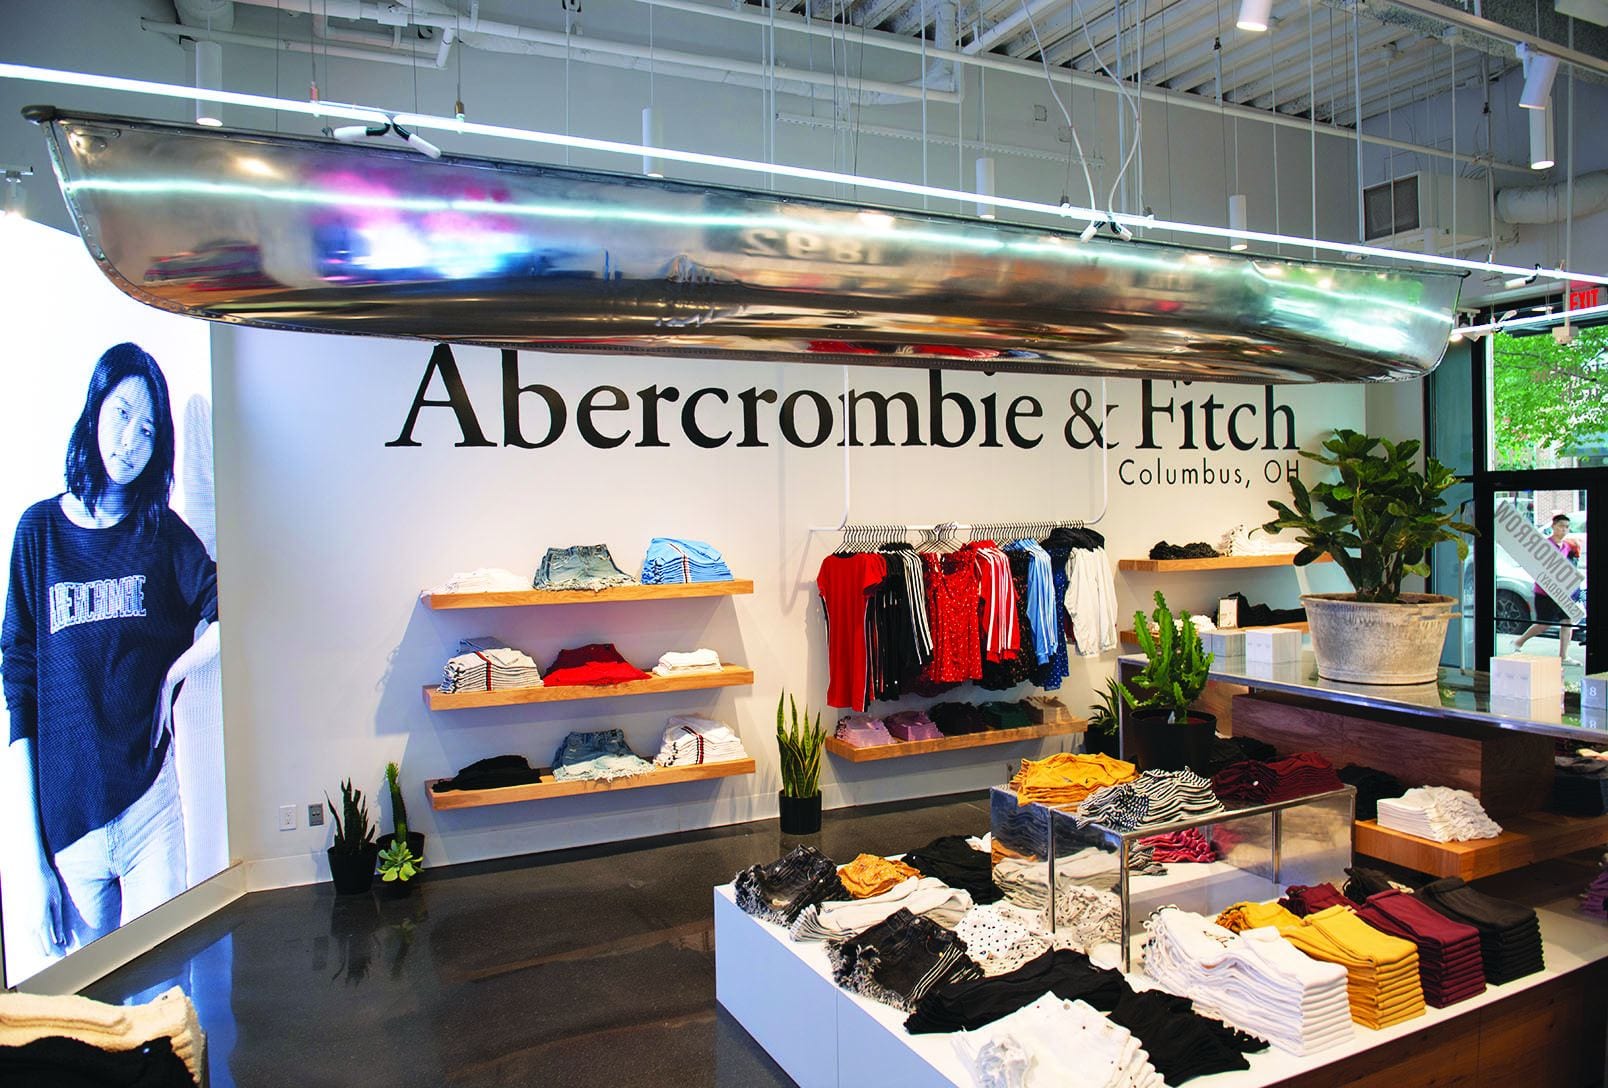 Abercrombie And Fitch : Abercrombie & Fitch sheds once-prized logo from